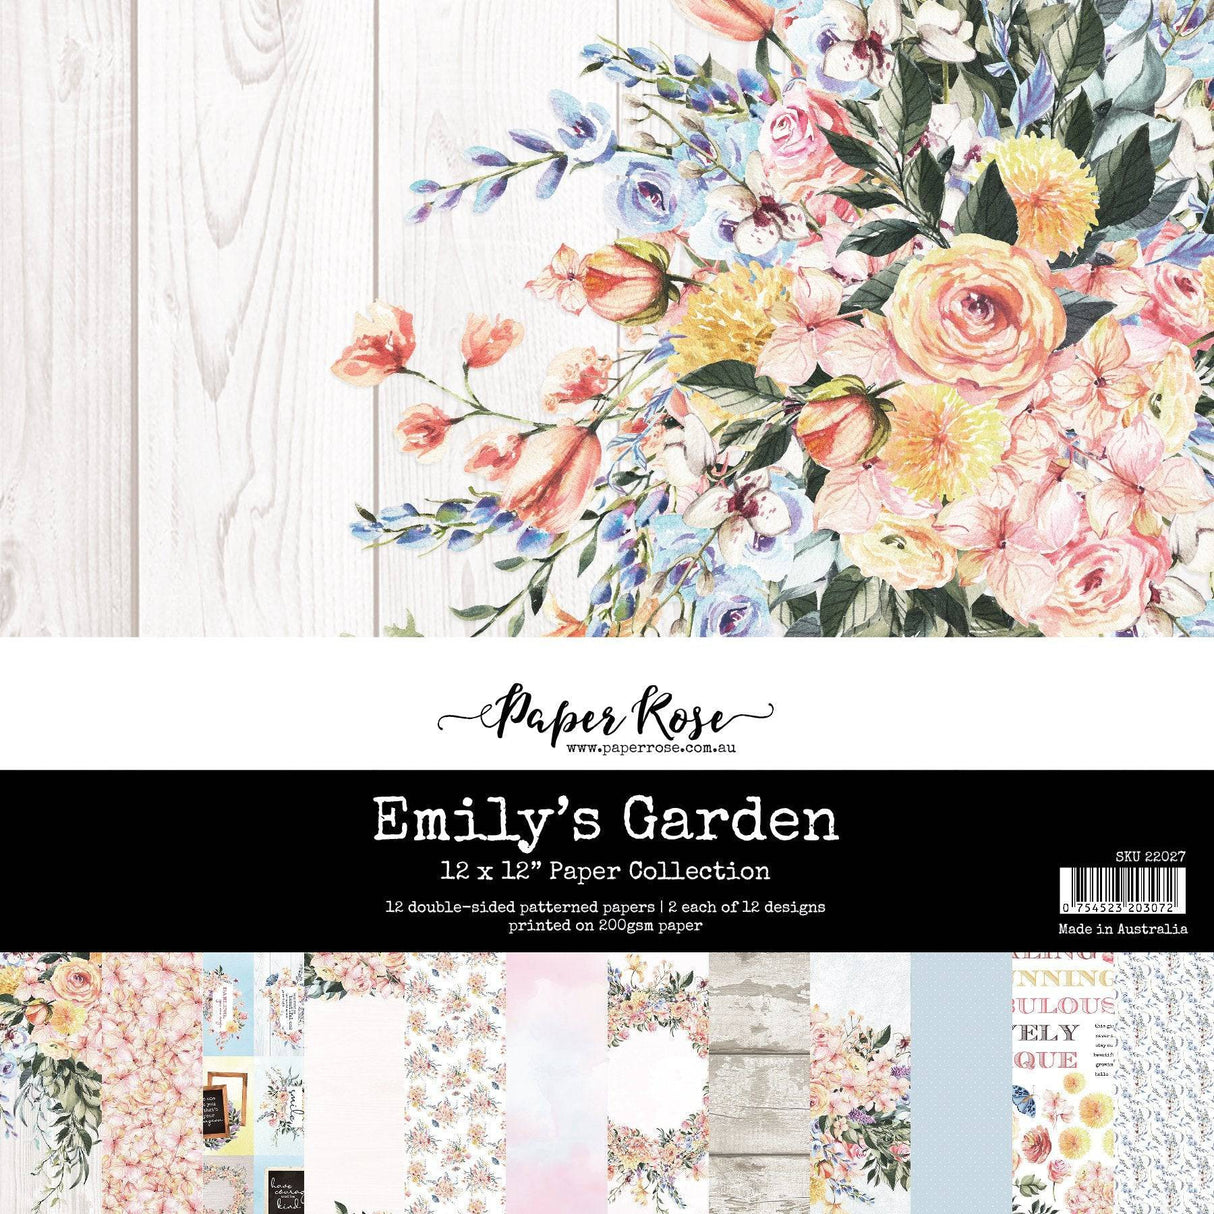 Emily's Garden 12x12 Paper Collection 22027 - Paper Rose Studio